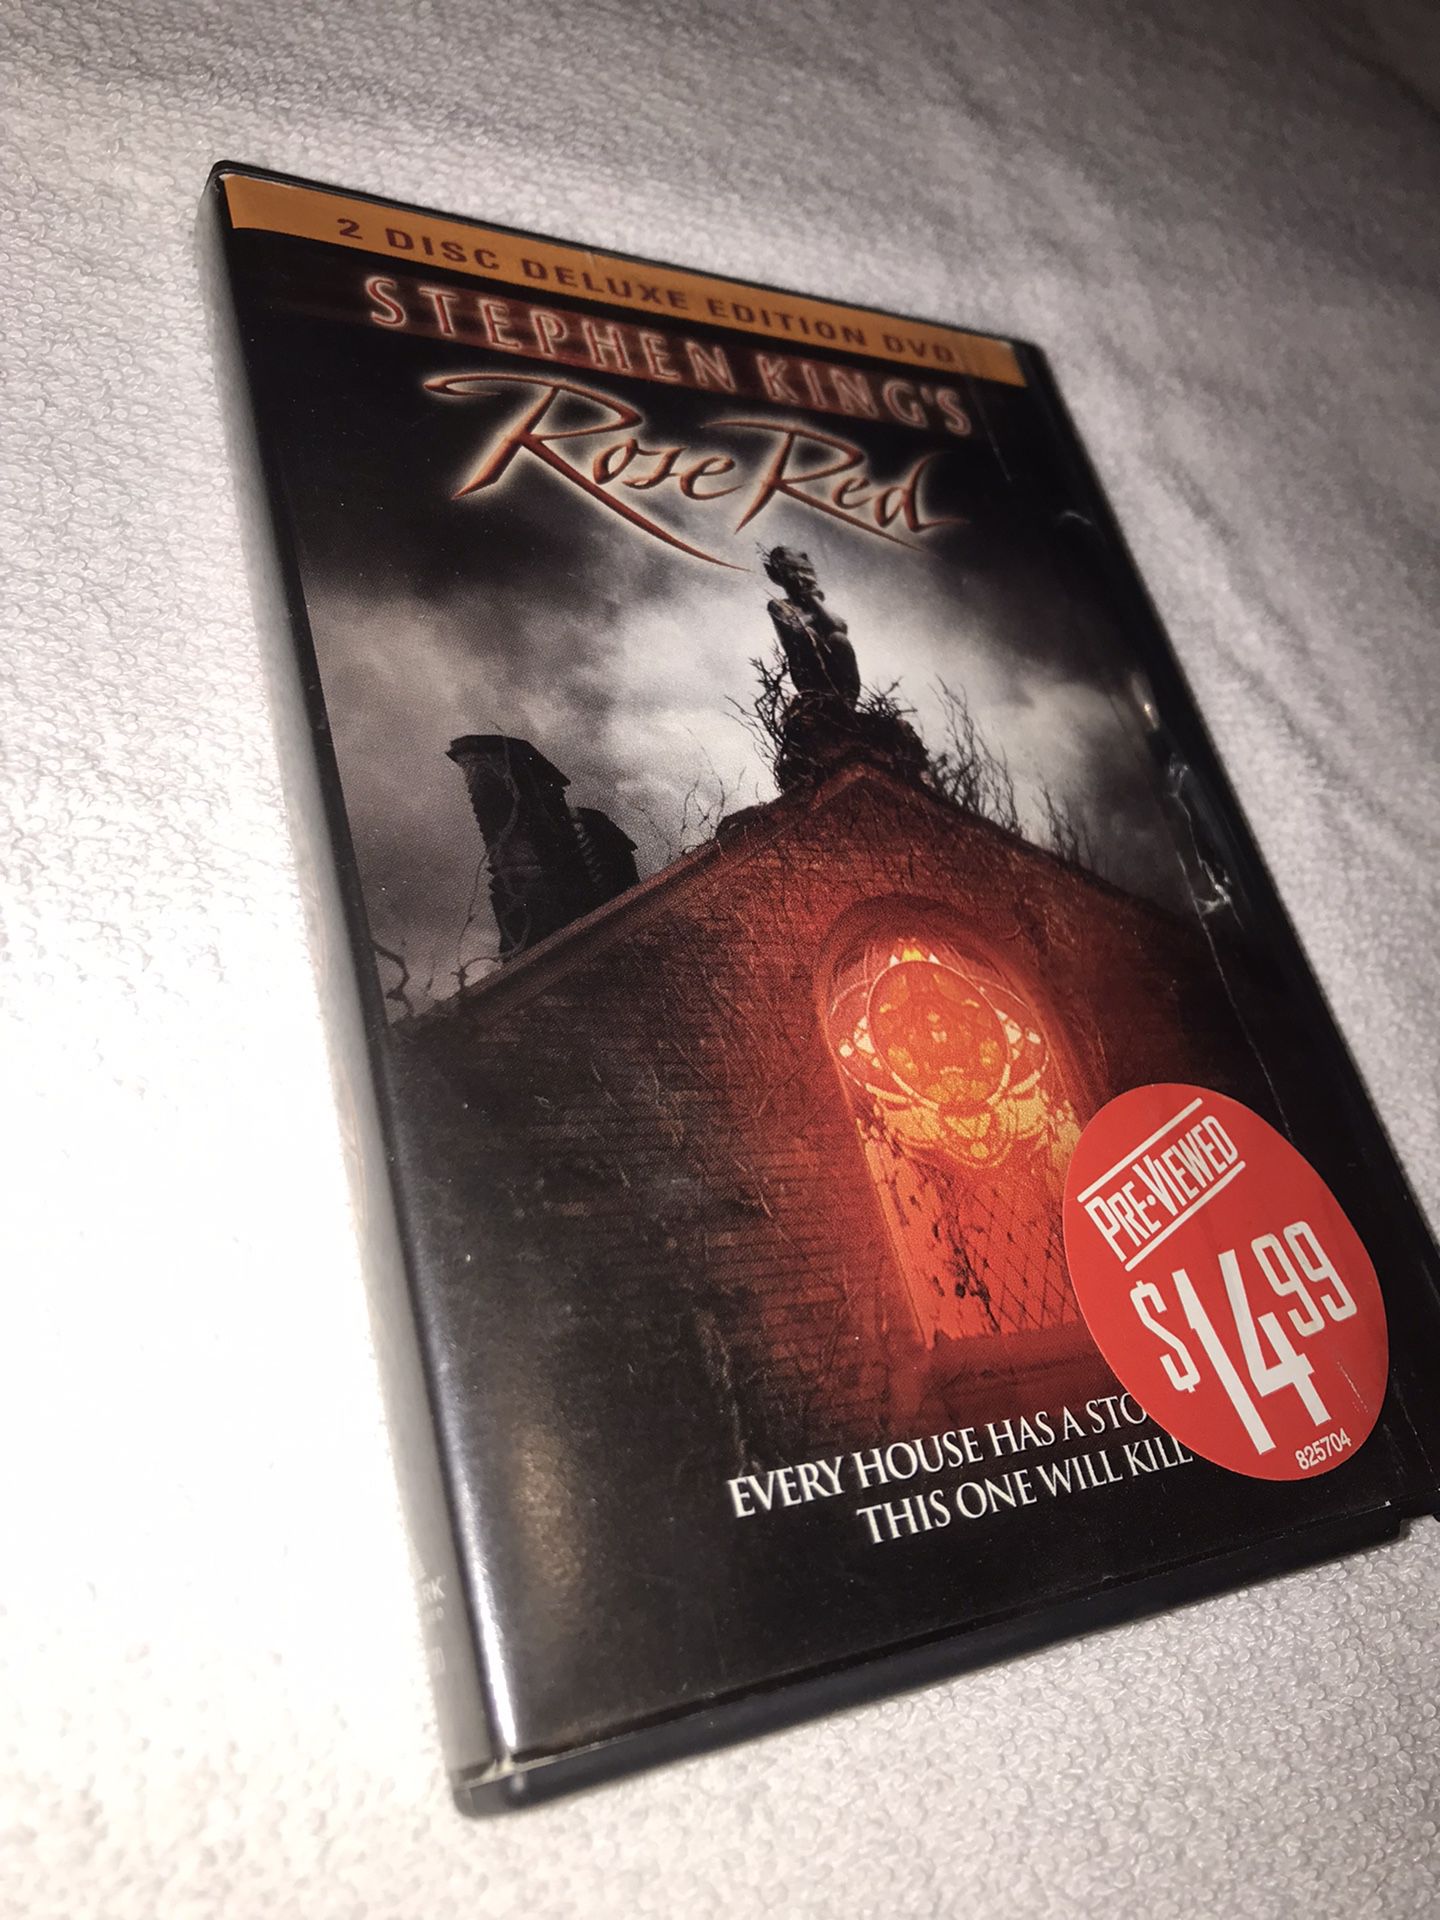 Stephen King’s Rose Red DVD for Sale! 